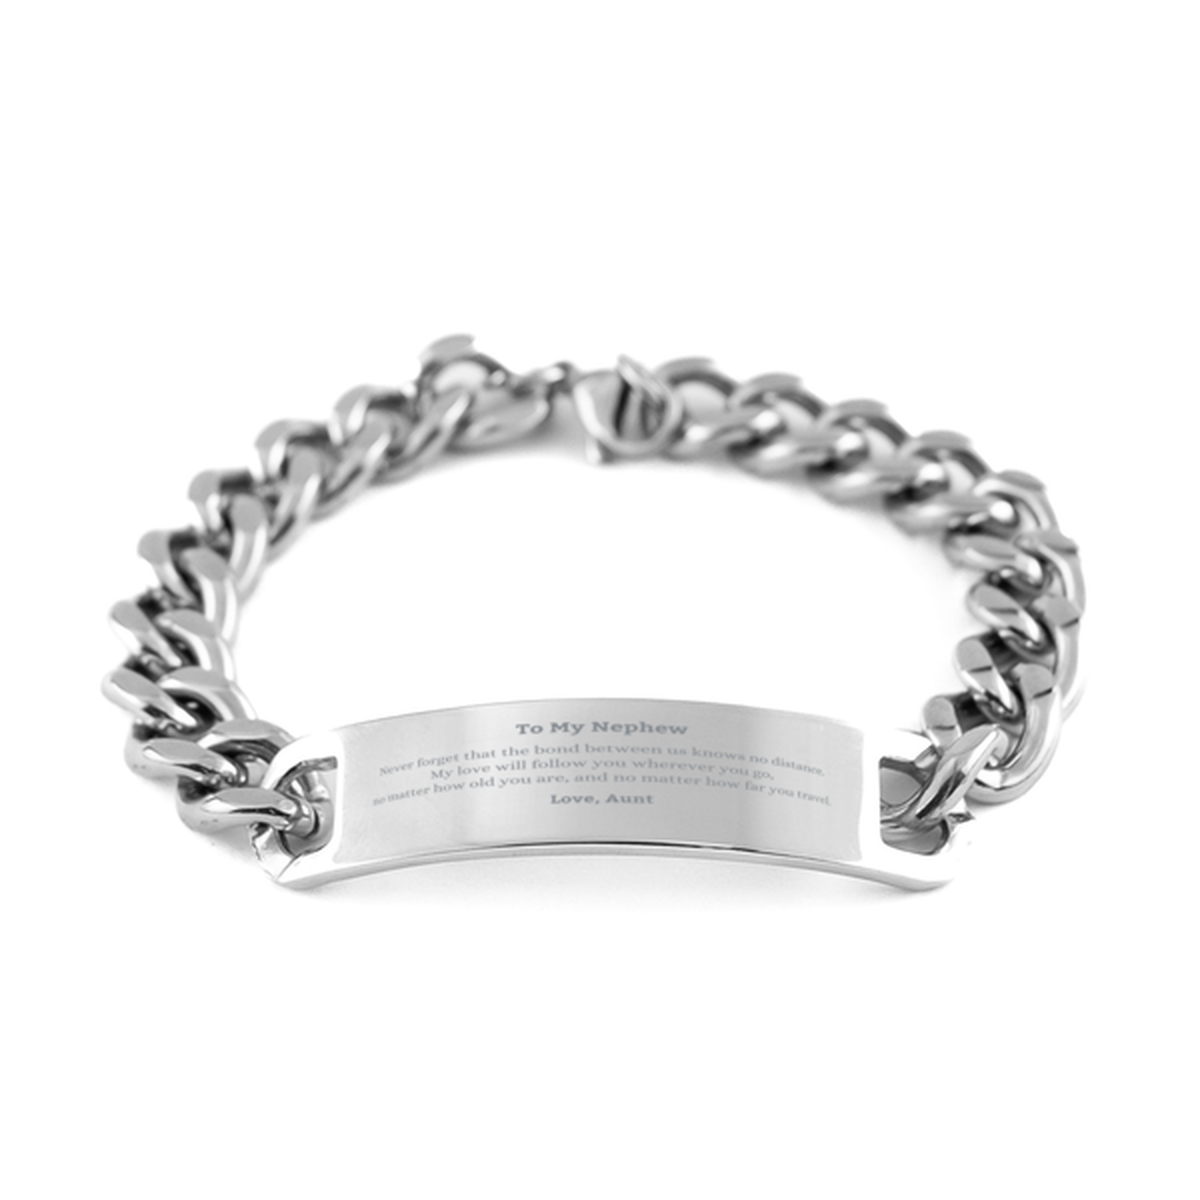 Nephew Birthday Gifts from Aunt, Adjustable Cuban Chain Stainless Steel Bracelet for Nephew Christmas Graduation Unique Gifts Nephew Never forget that the bond between us knows no distance. Love, Aunt